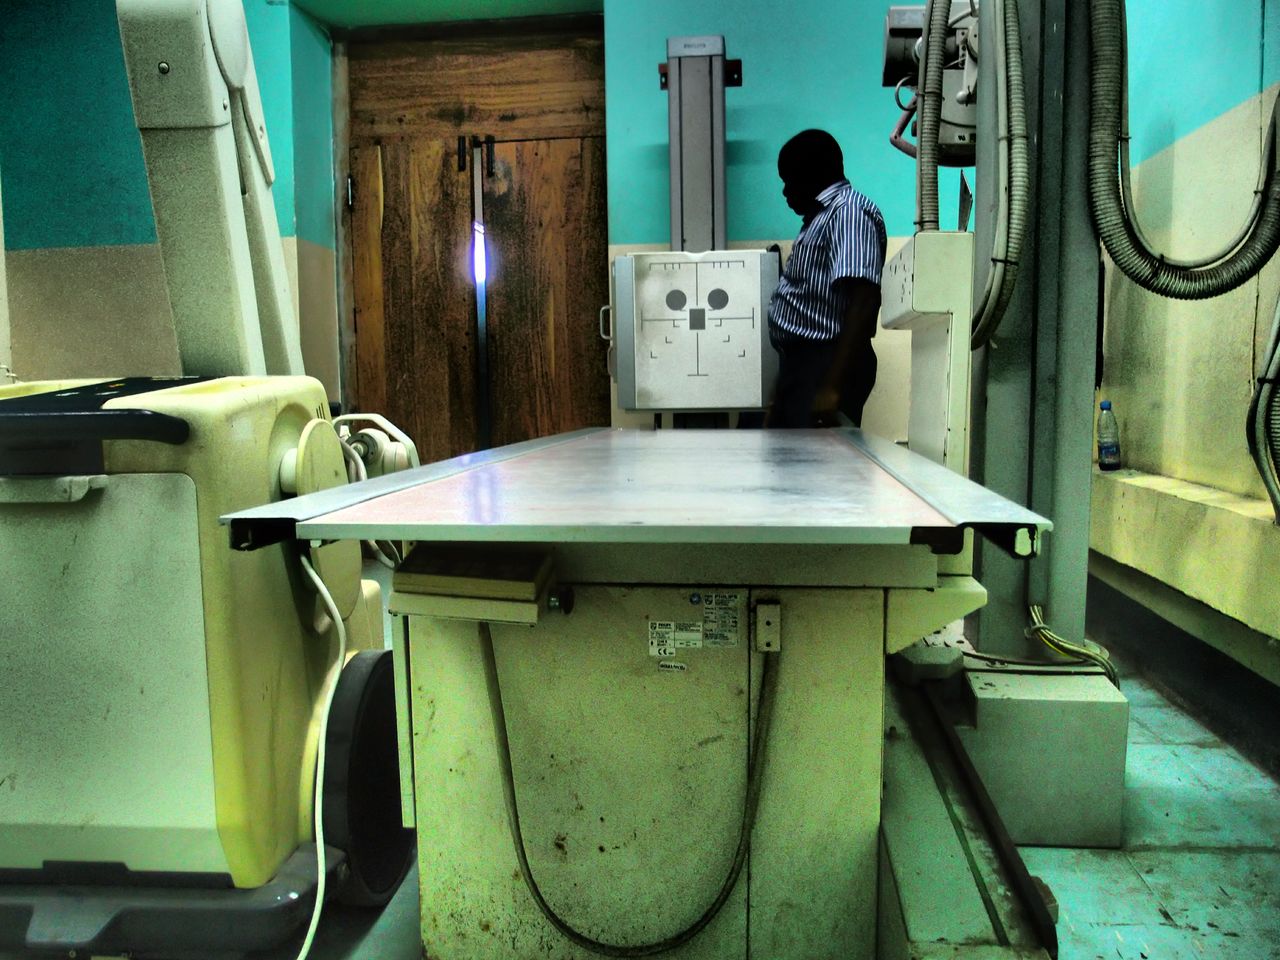 Keeping it running, keeping it used: MED International is working to build Zanzibari hospitals’ capacity for managing medical equipment — maintaining it and repairing it it it breaks under heavy use.